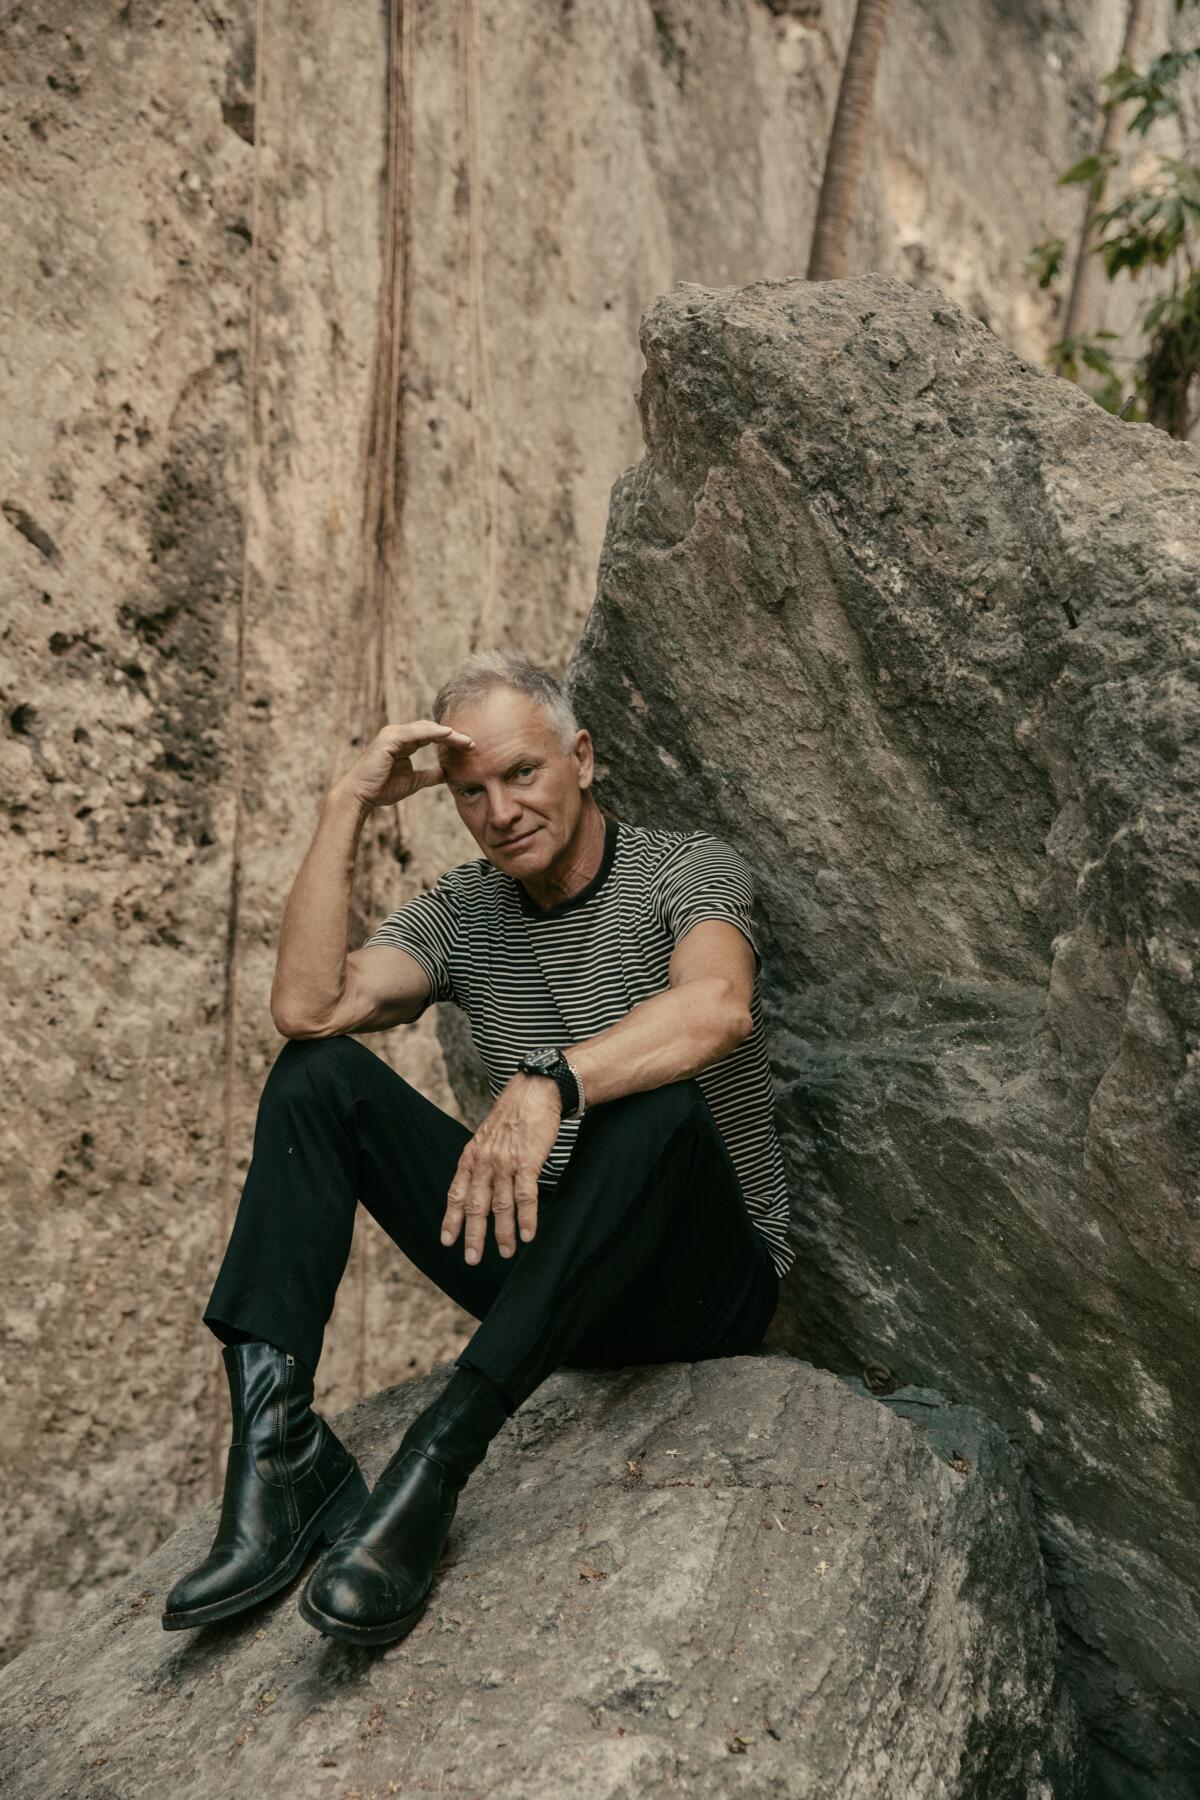 Sting sitting on a large rock.